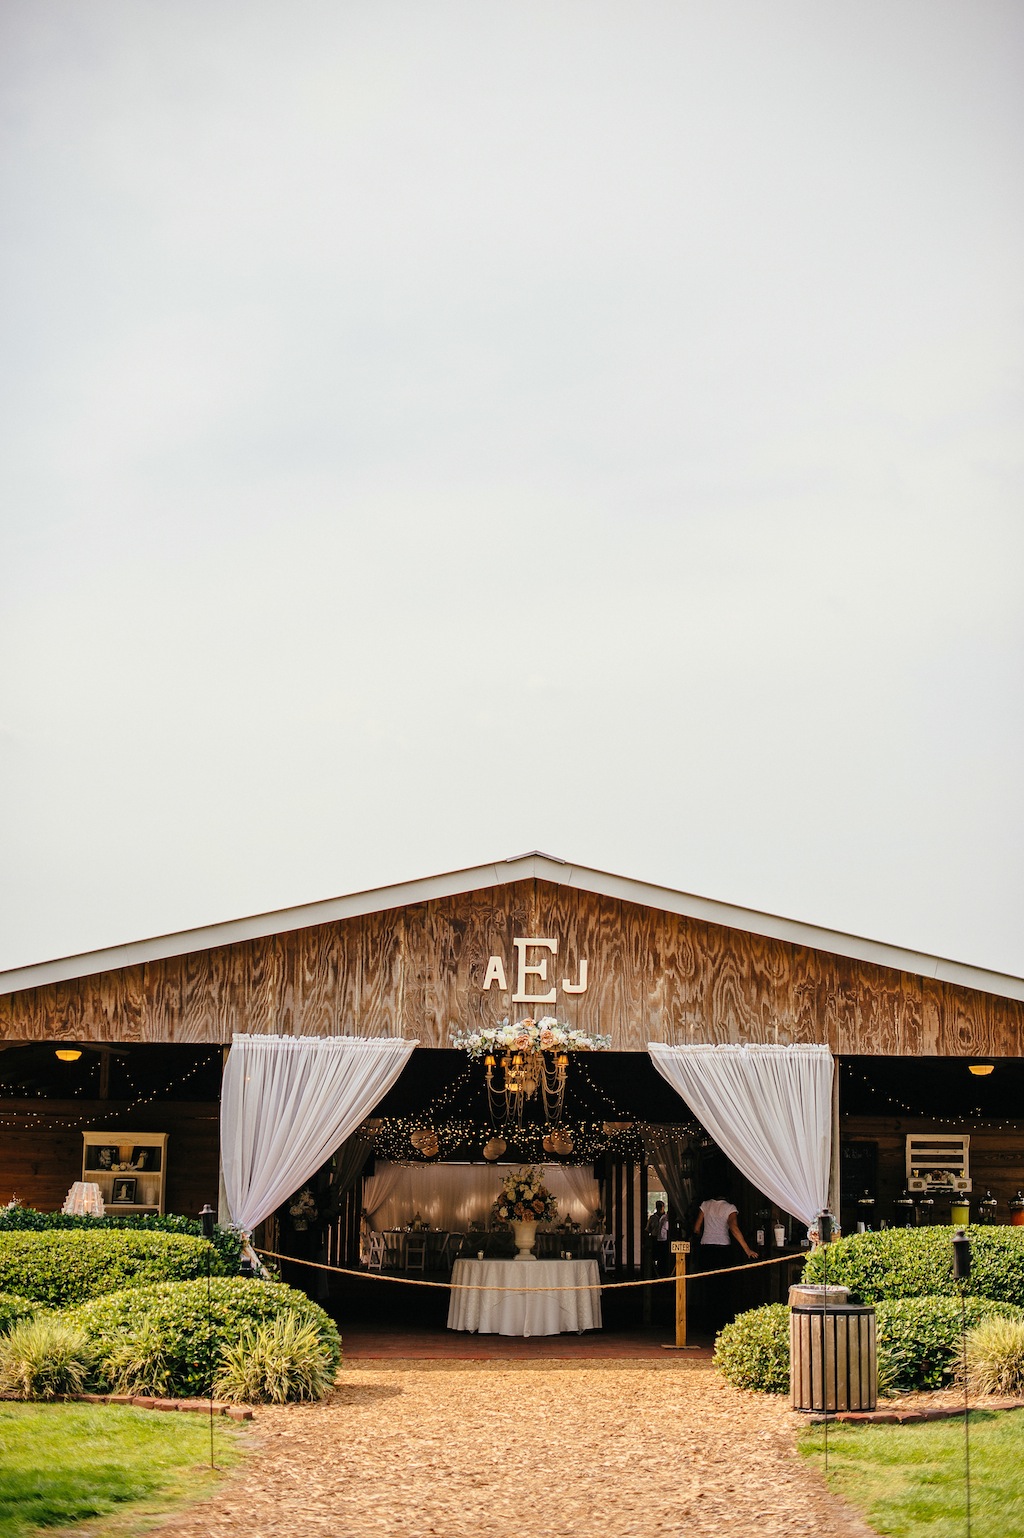 Cross Creek Ranch Wedding near Tampa Bay, Fl - Rustic Rose, Burlap and Lace by Lakeland Wedding Photographer Sunglow Photography (21)